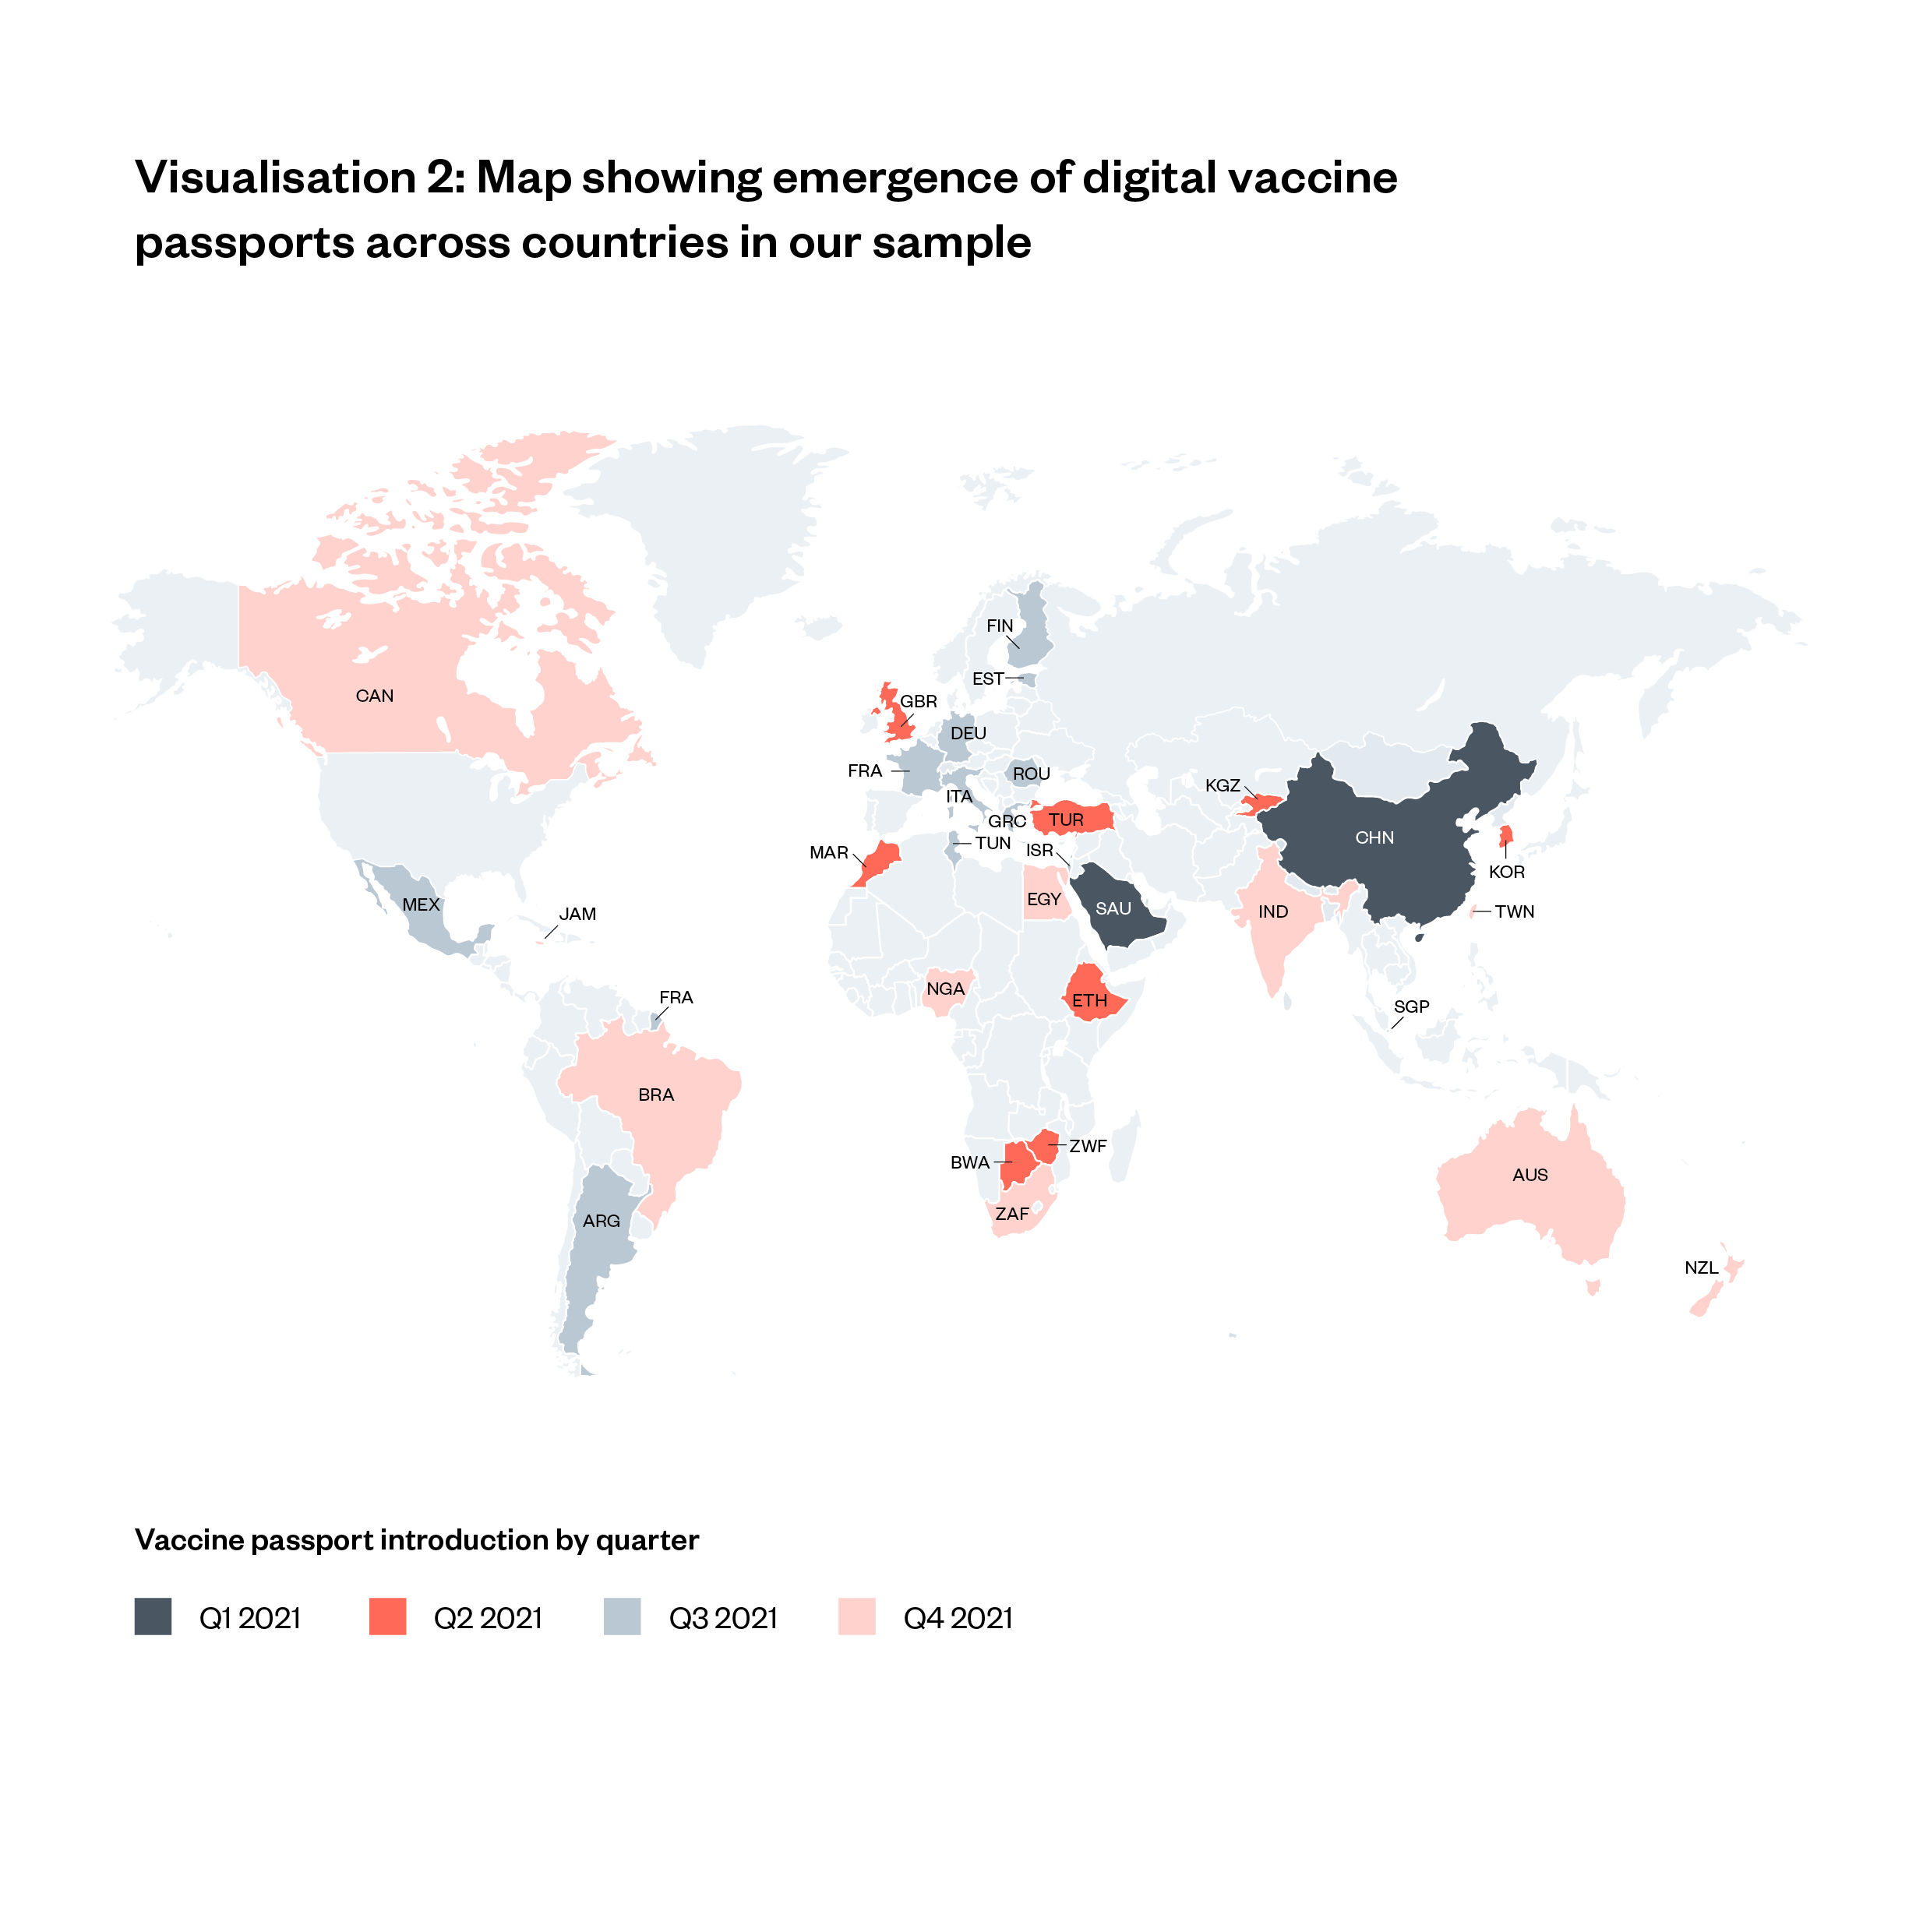 A map of the world that shows the introduction of vaccine passports in countries in our sample by quarter